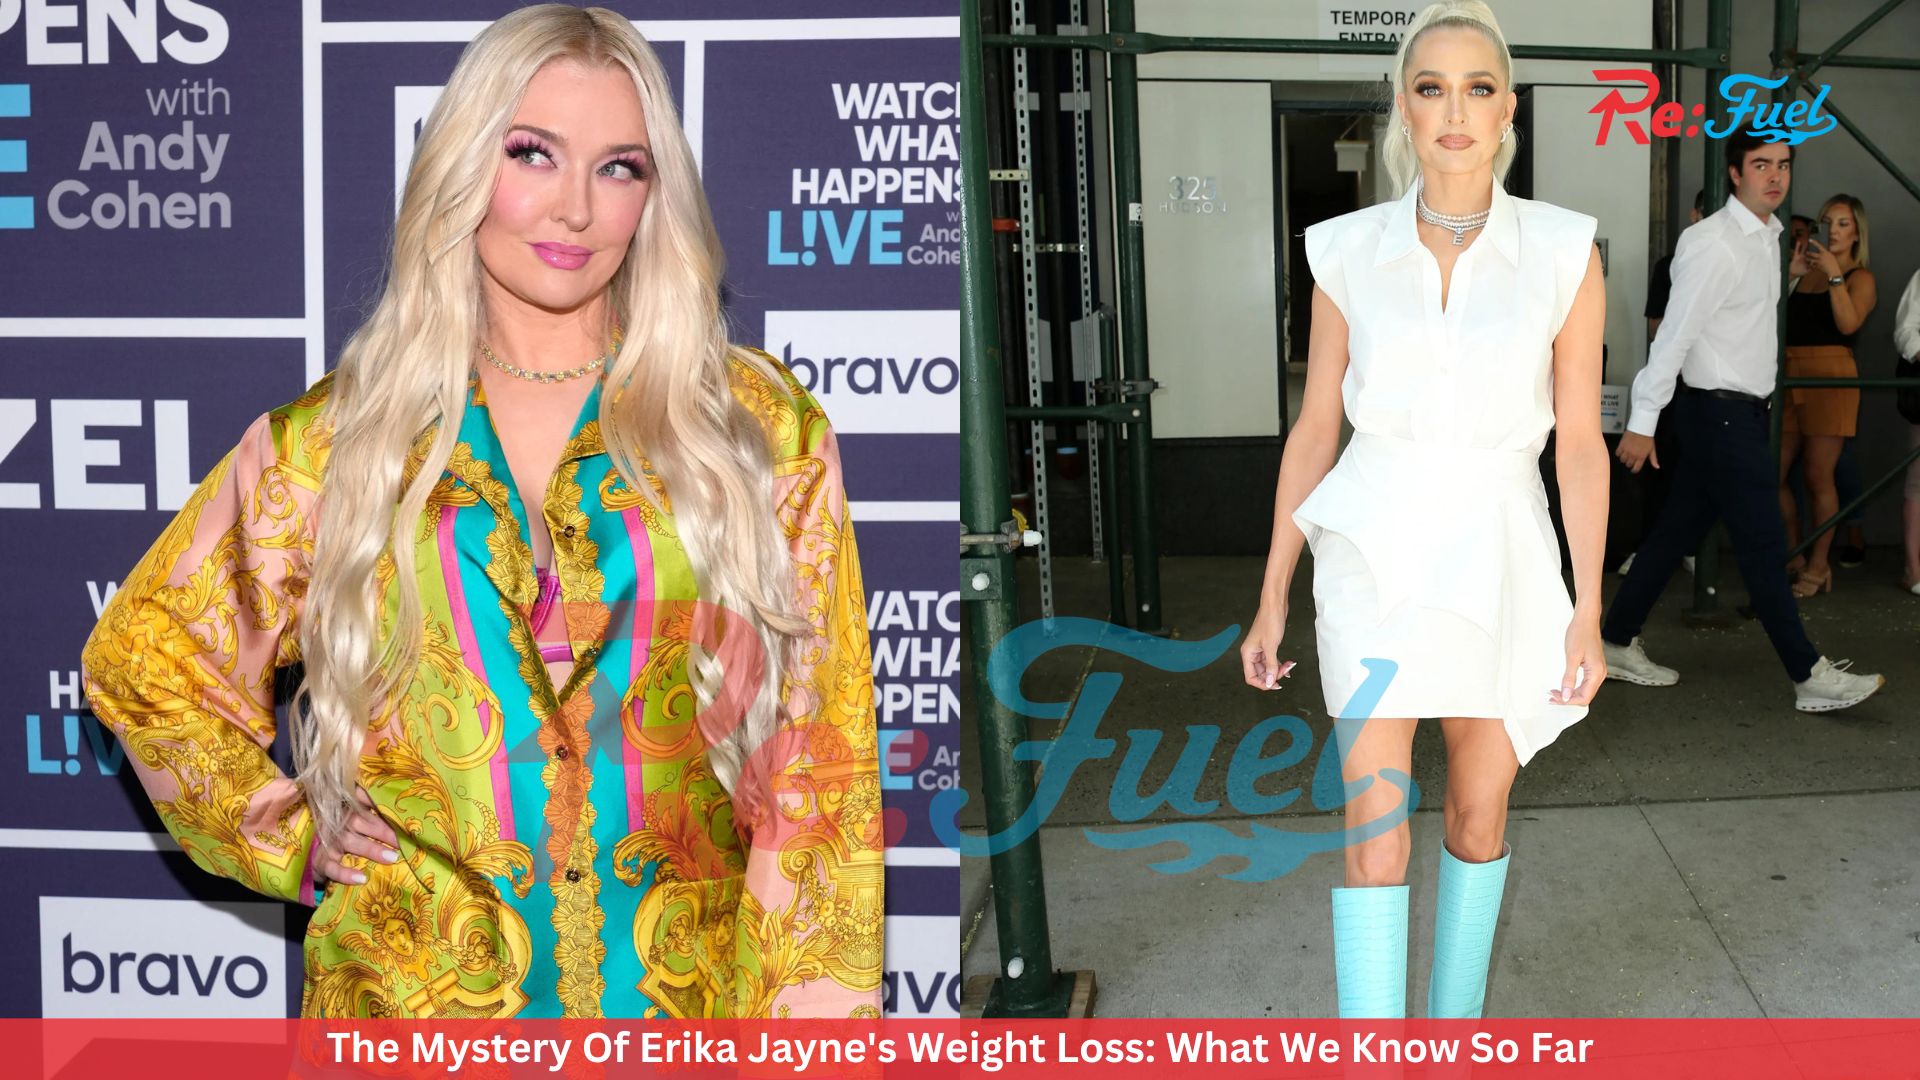 The Mystery Of Erika Jayne's Weight Loss: What We Know So Far